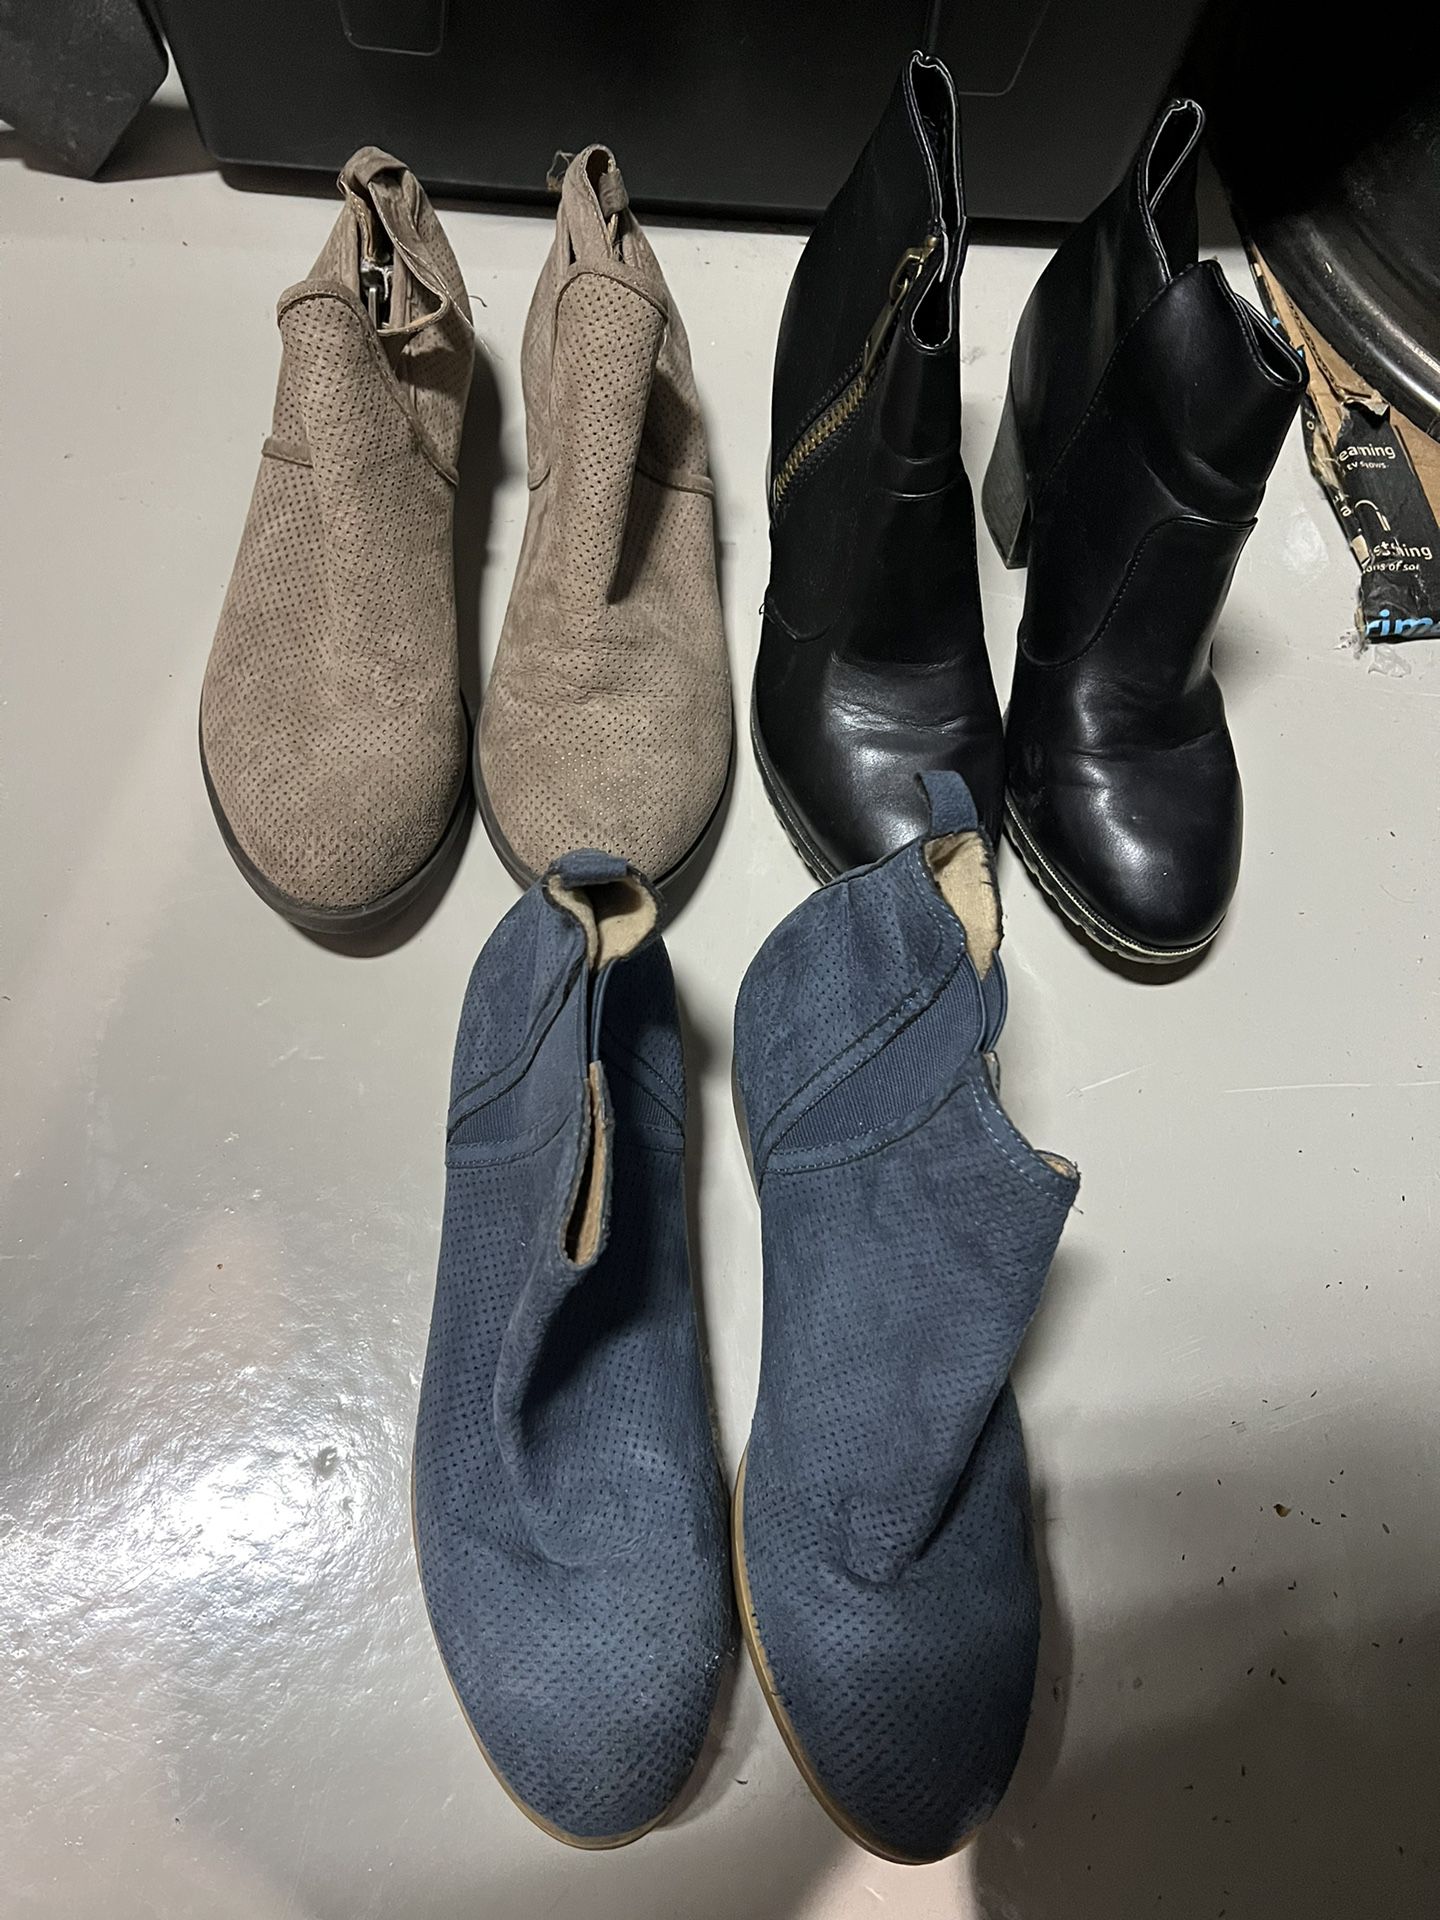 WOMAN BOOTIES BOOTS (GREAT CONDITION) - $10